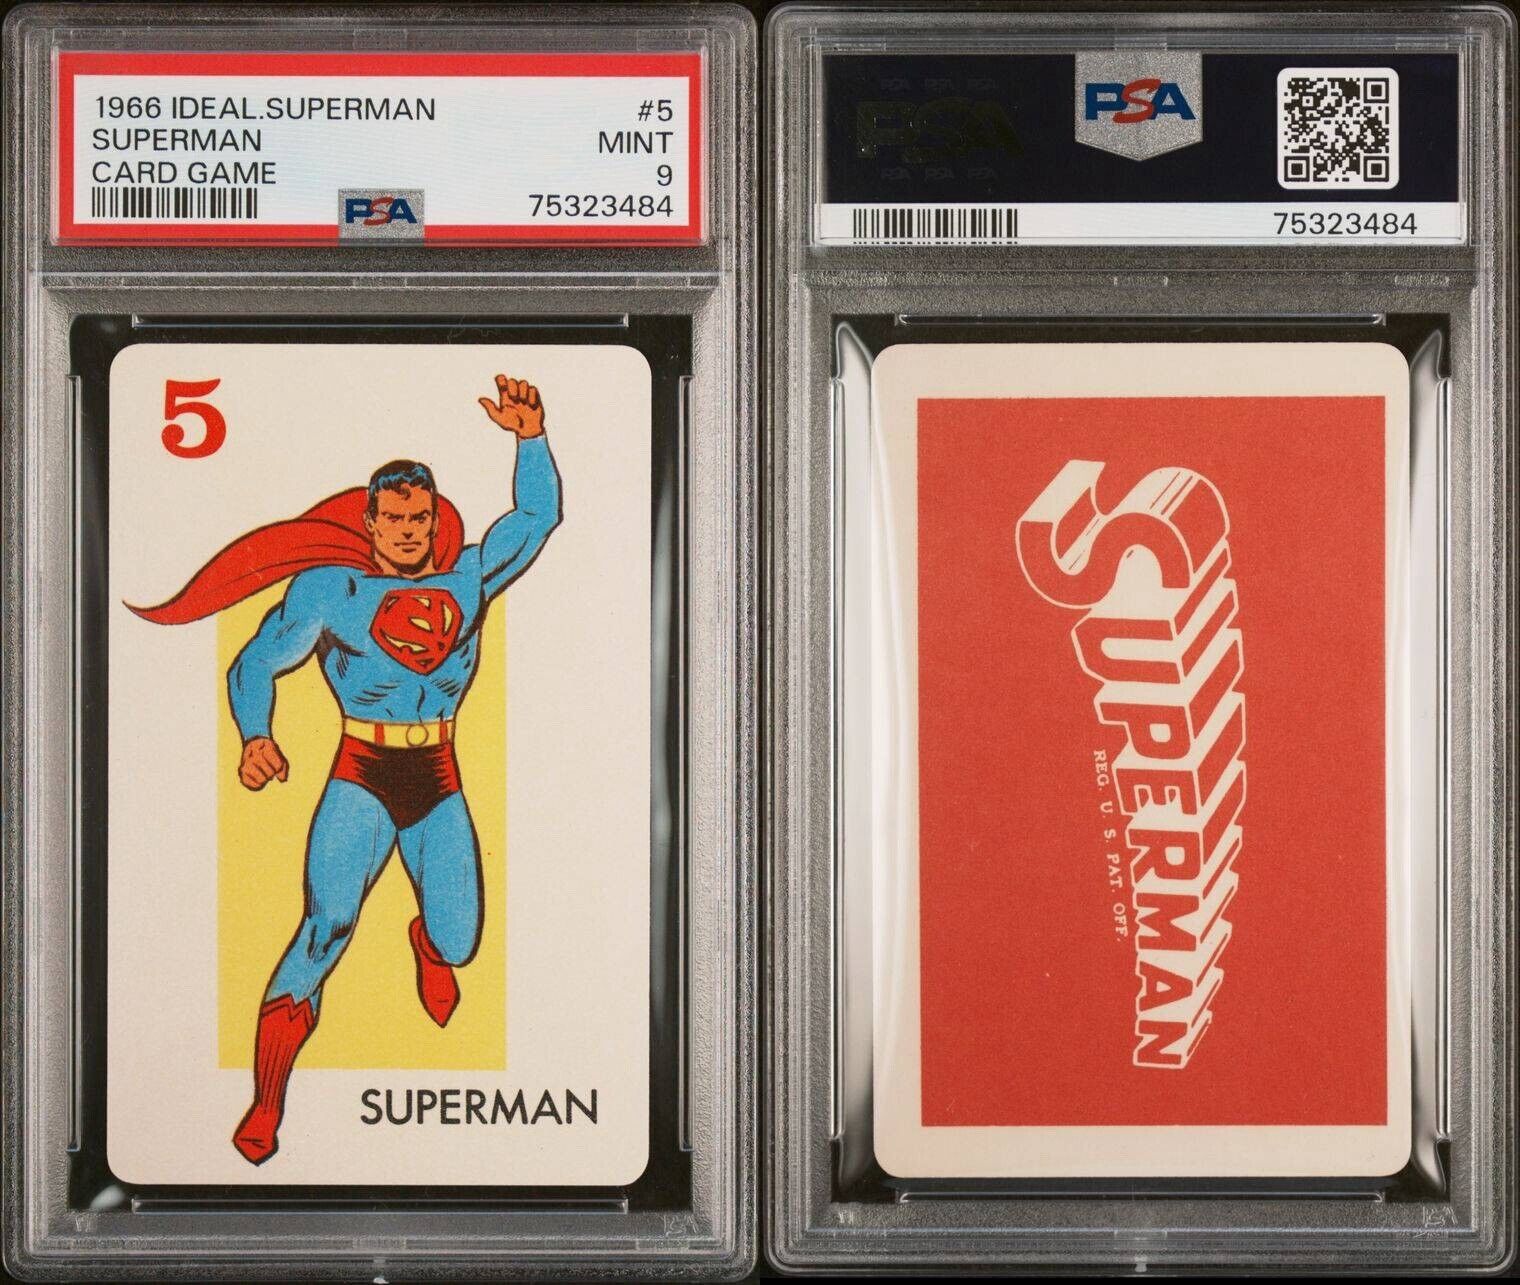 EXTREMELY RARE VINTAGE 1966 IDEAL SUPERMAN CARD GAME ROOKIE PSA 9 MINT